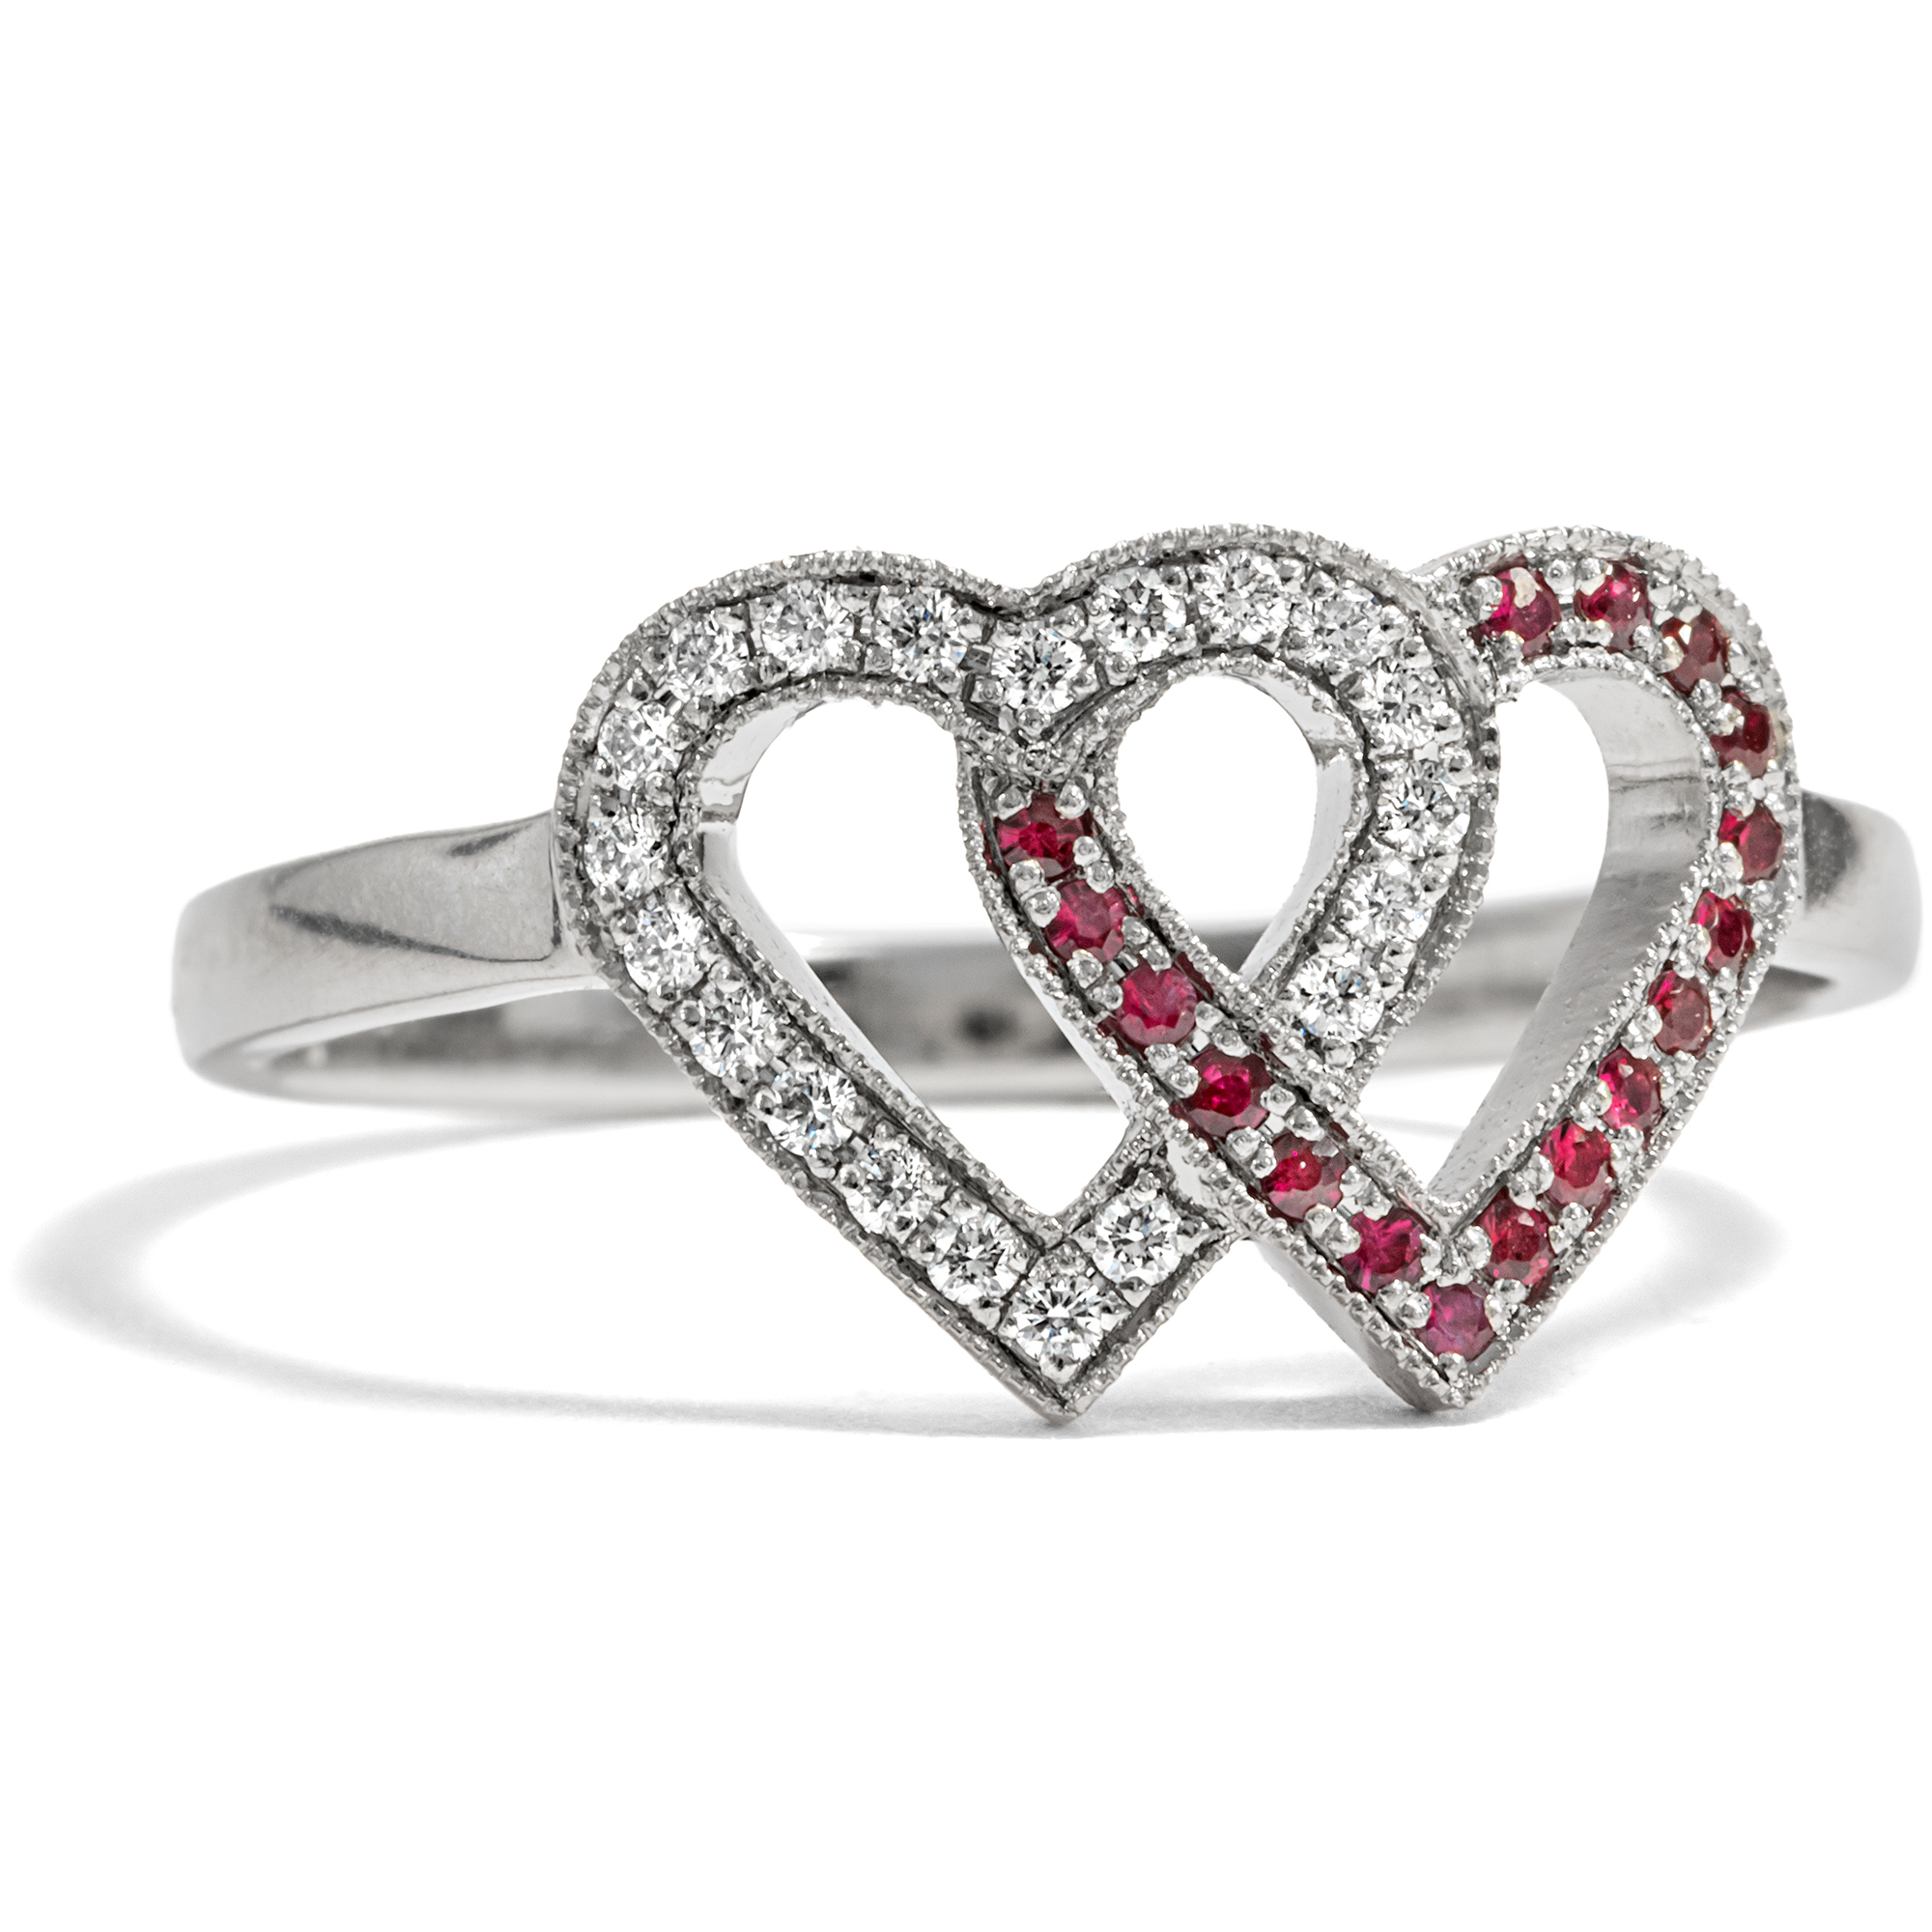 Delicate Ring Made in Our Workshop with Diamonds & Rubies Set in Platinum